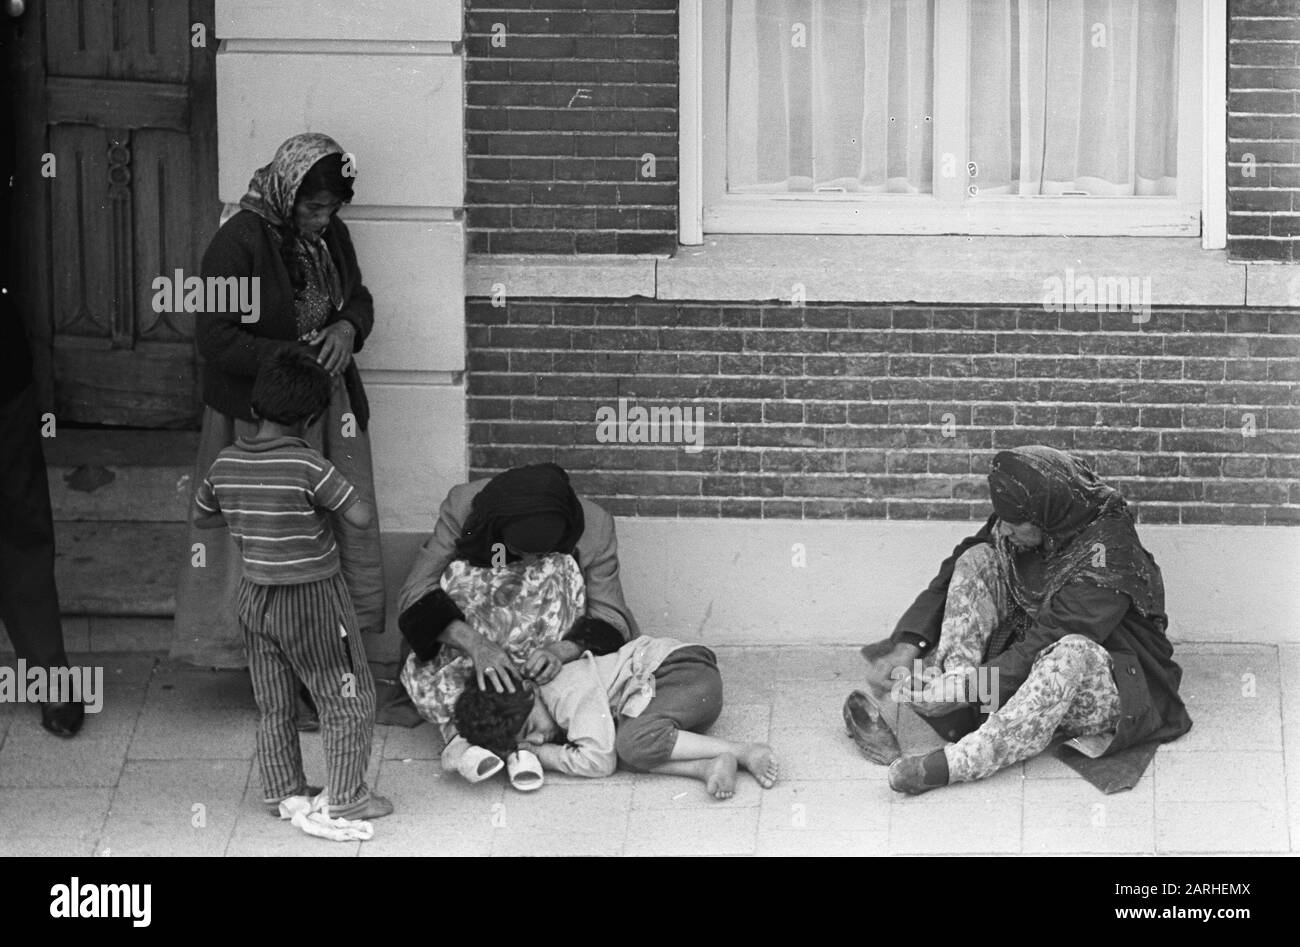 Gypsy women occupy police station Raamsdonksveer, one of the children sleeps, his head is searched Date: June 8, 1964 Location: Raamsdonksveer Keywords: Children, occupations, etc. police stations, women, gypsies Stock Photo